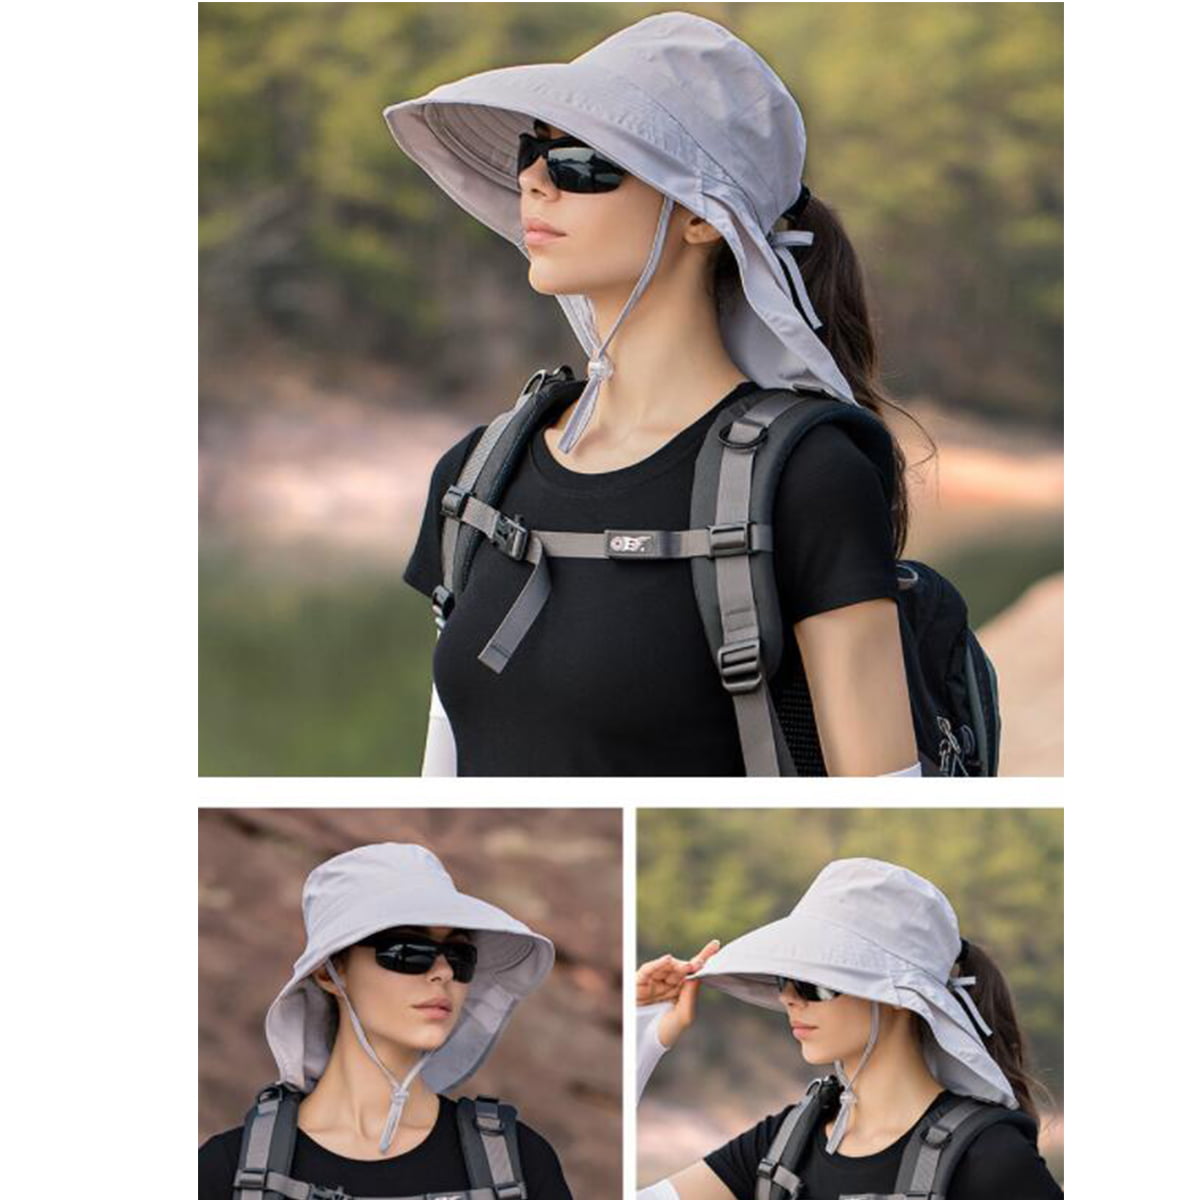 Breathable UV Uv Protection Fishing Hats With Wide Brim And Neck Flap For  Women And Men Ideal For Outdoor Activities Like Fishing, Climbing, And  Hiking J0502 From Us_oklahoma, $8.83